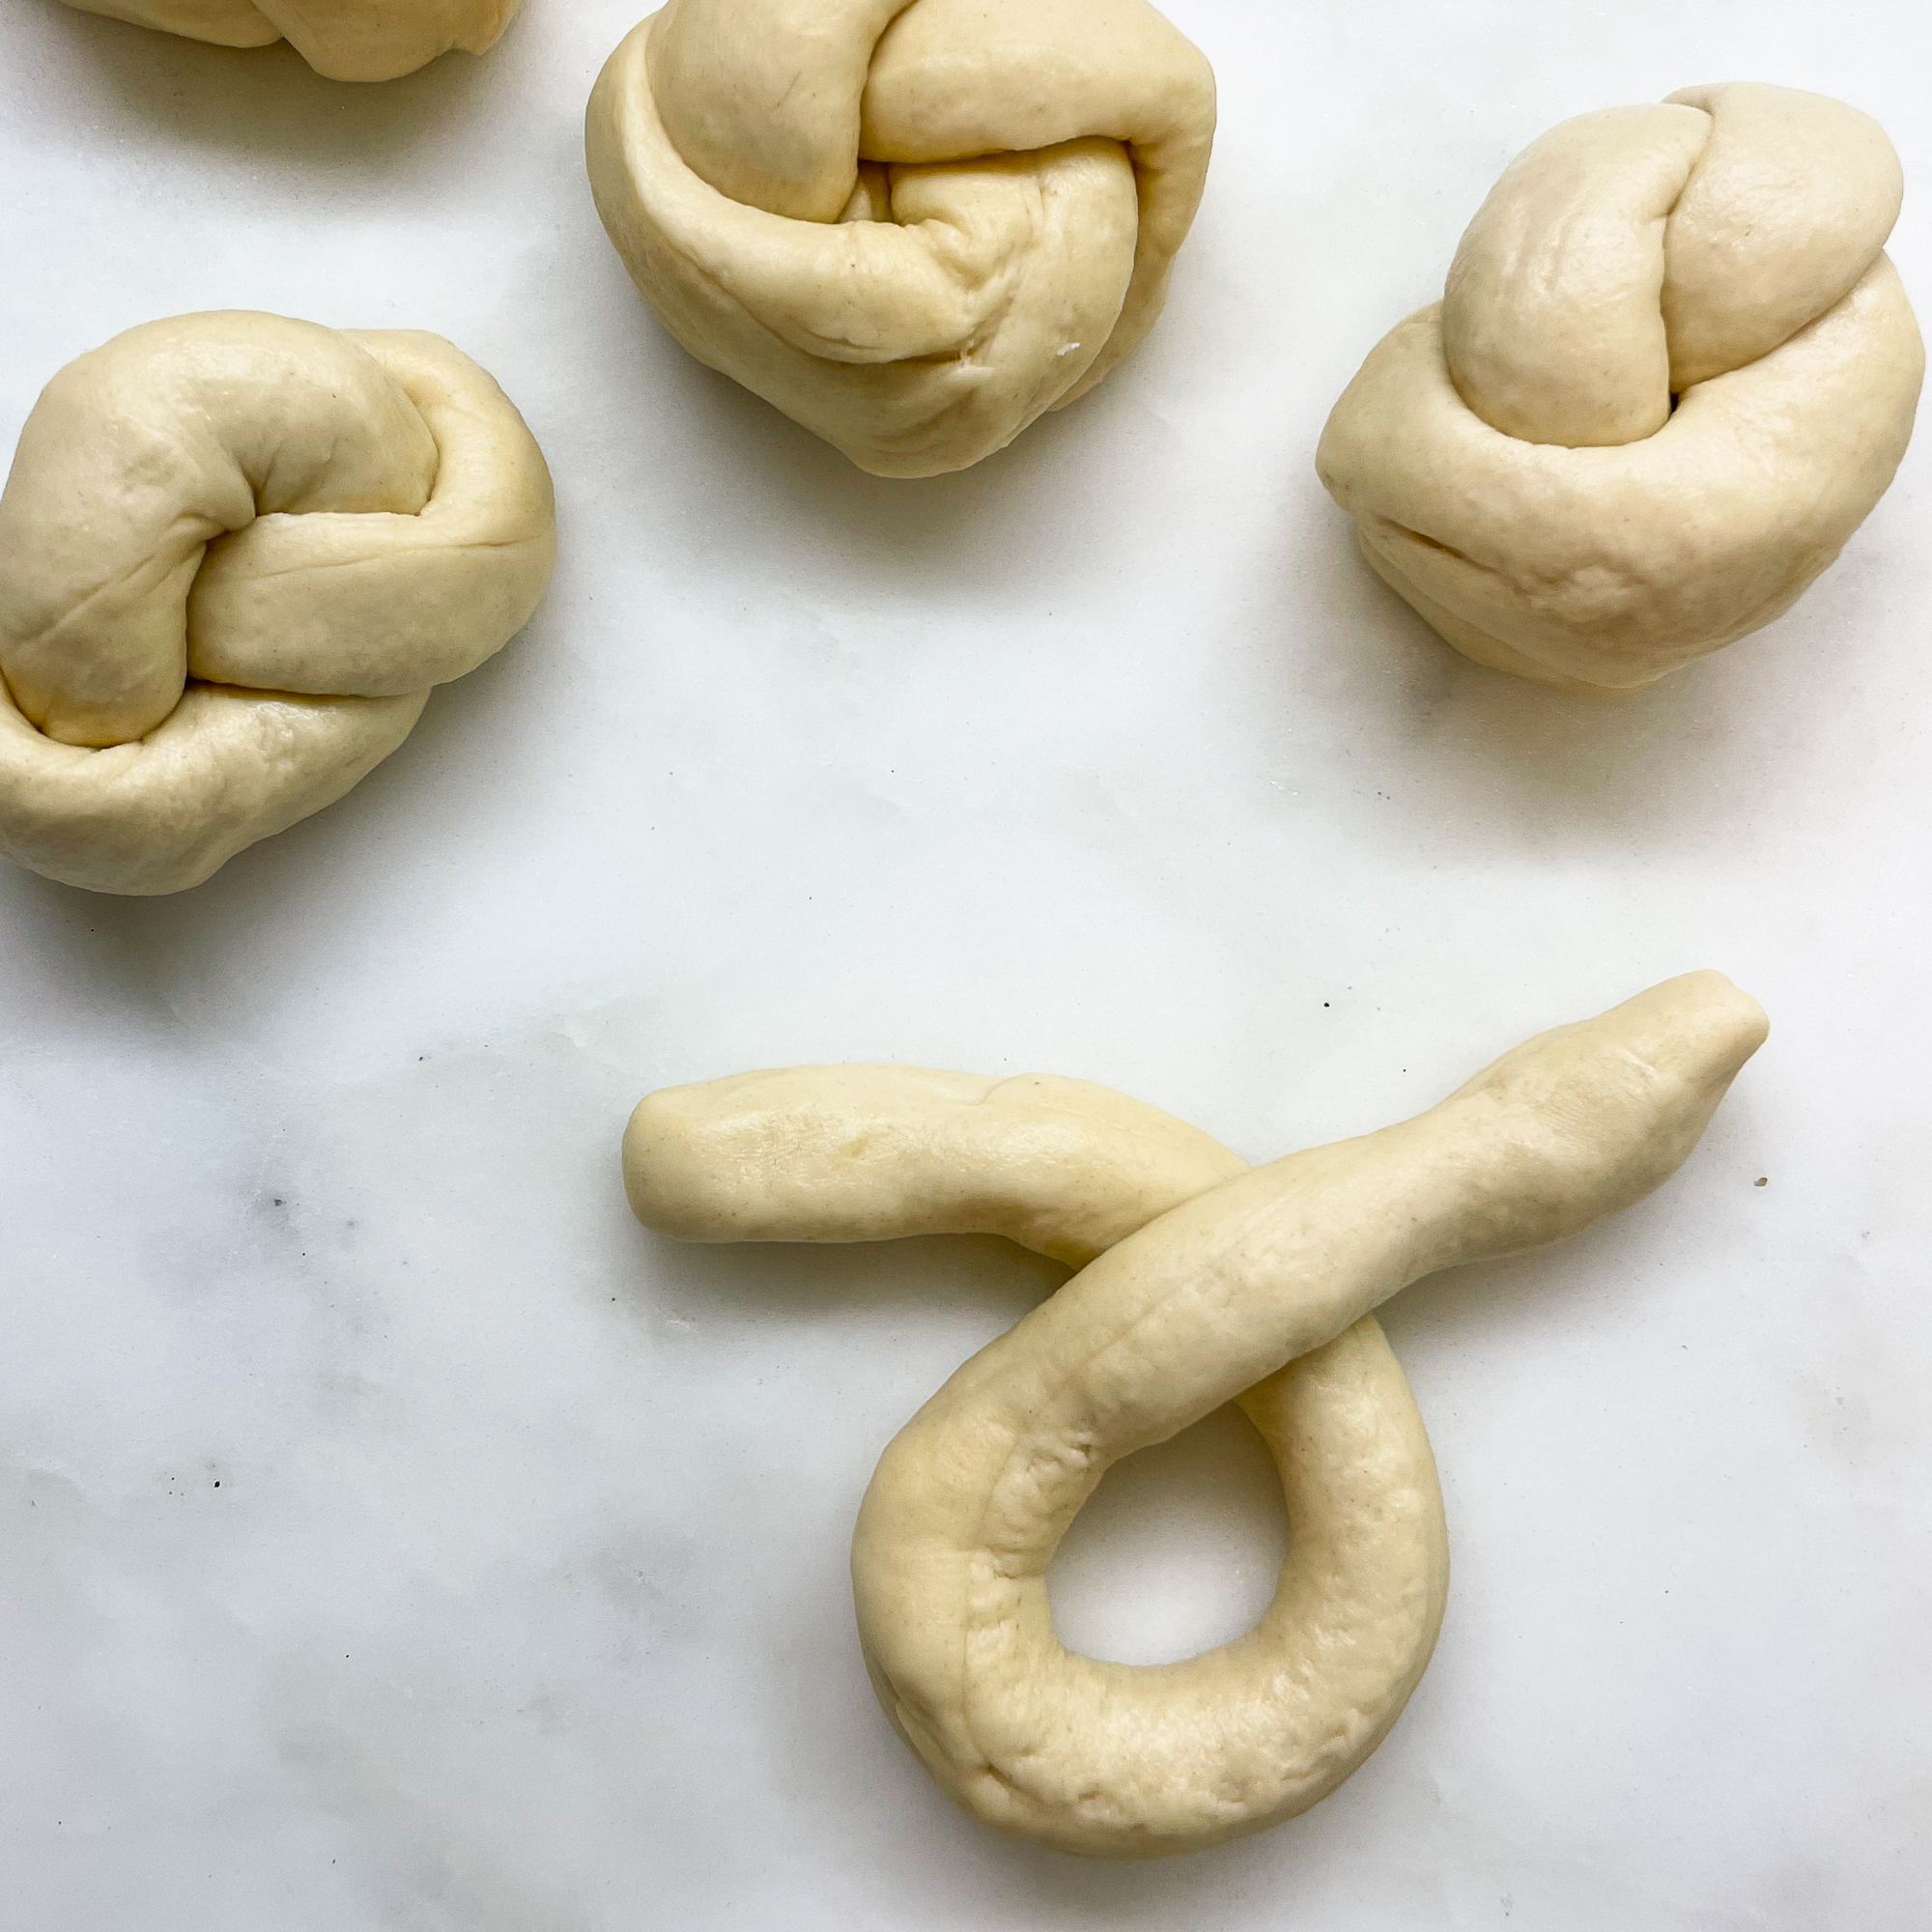 three sourdough discard garlic knots in background with a rope of dough looped over itself showing how to make the knot